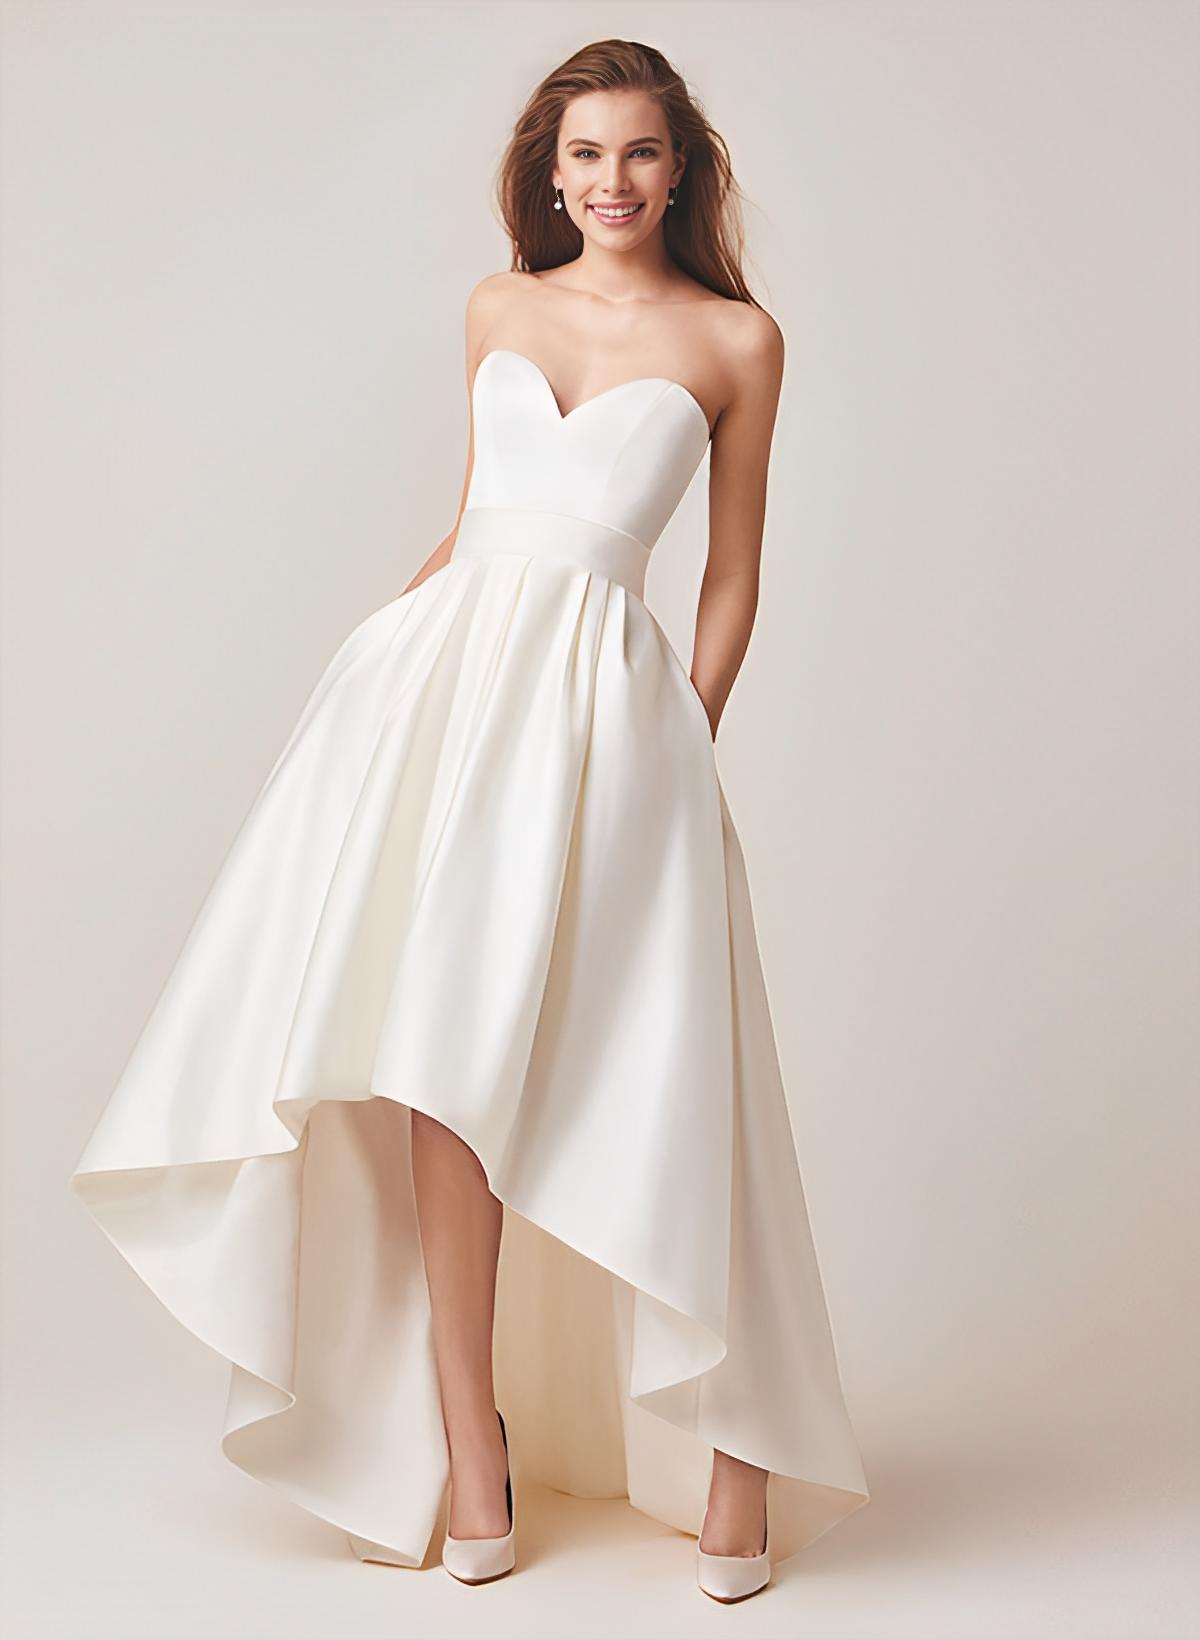 Two-Piece Wedding Dresses With Satin Fabric A-Line Zipper Sleeveless Ivory Simple Bridal Dress